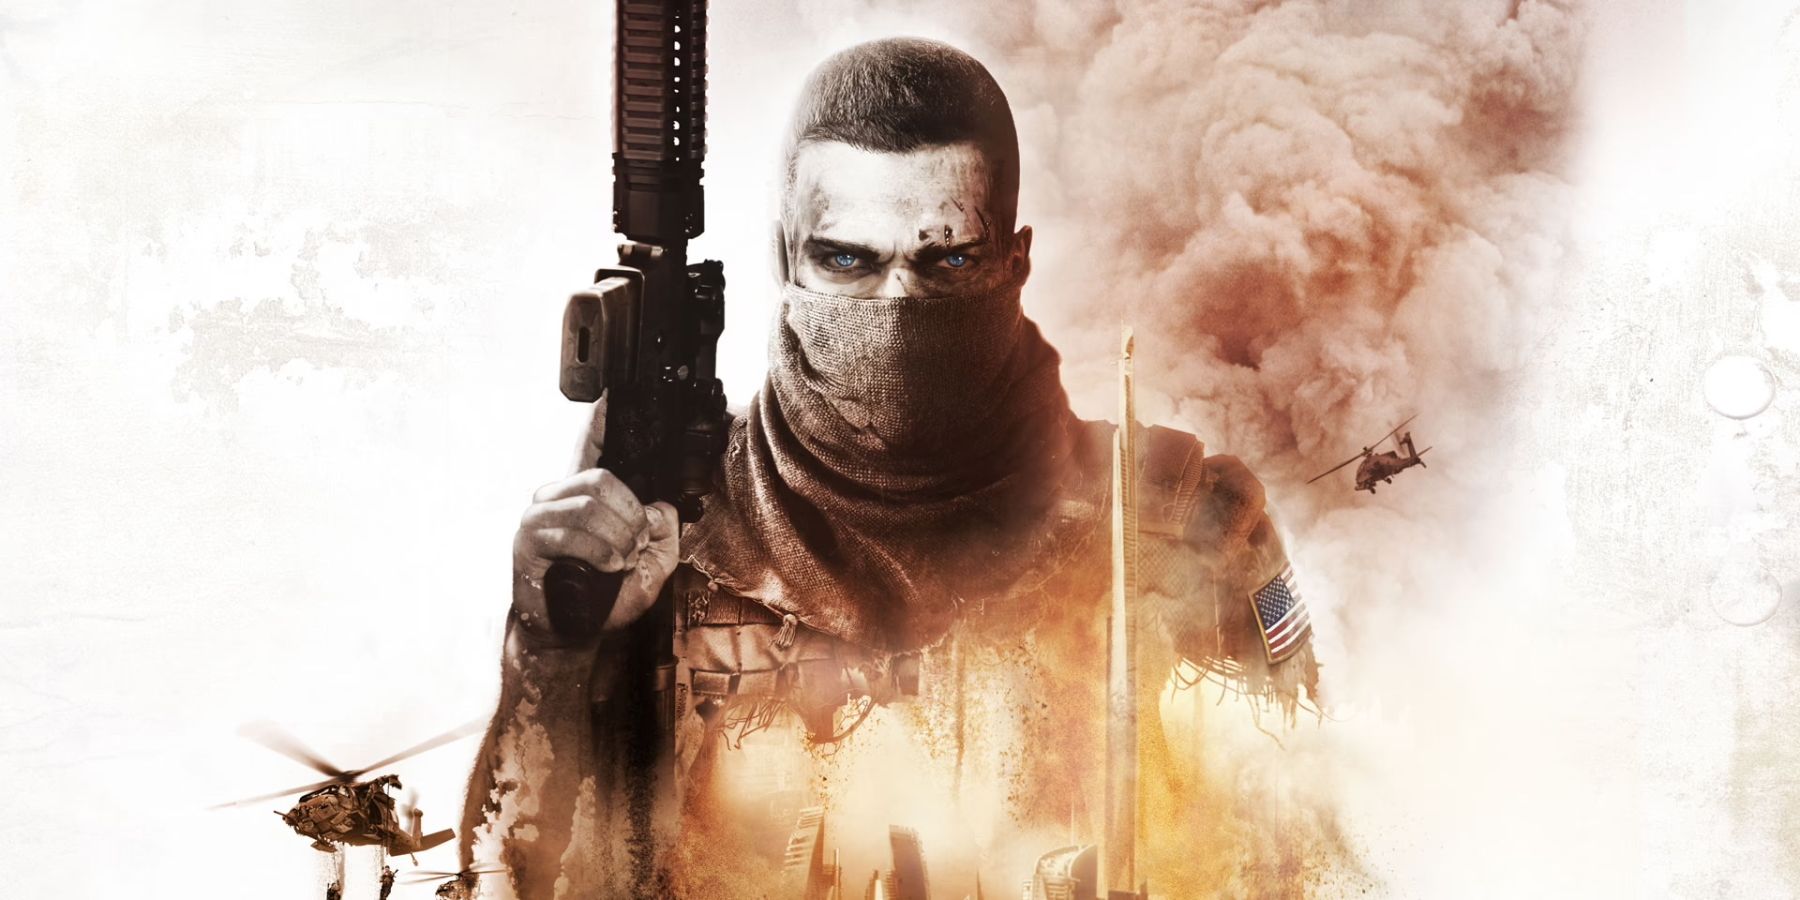 The key art for 2012 third-person shooter Spec Ops: The Line, depicting main character Captain Martin Walker.